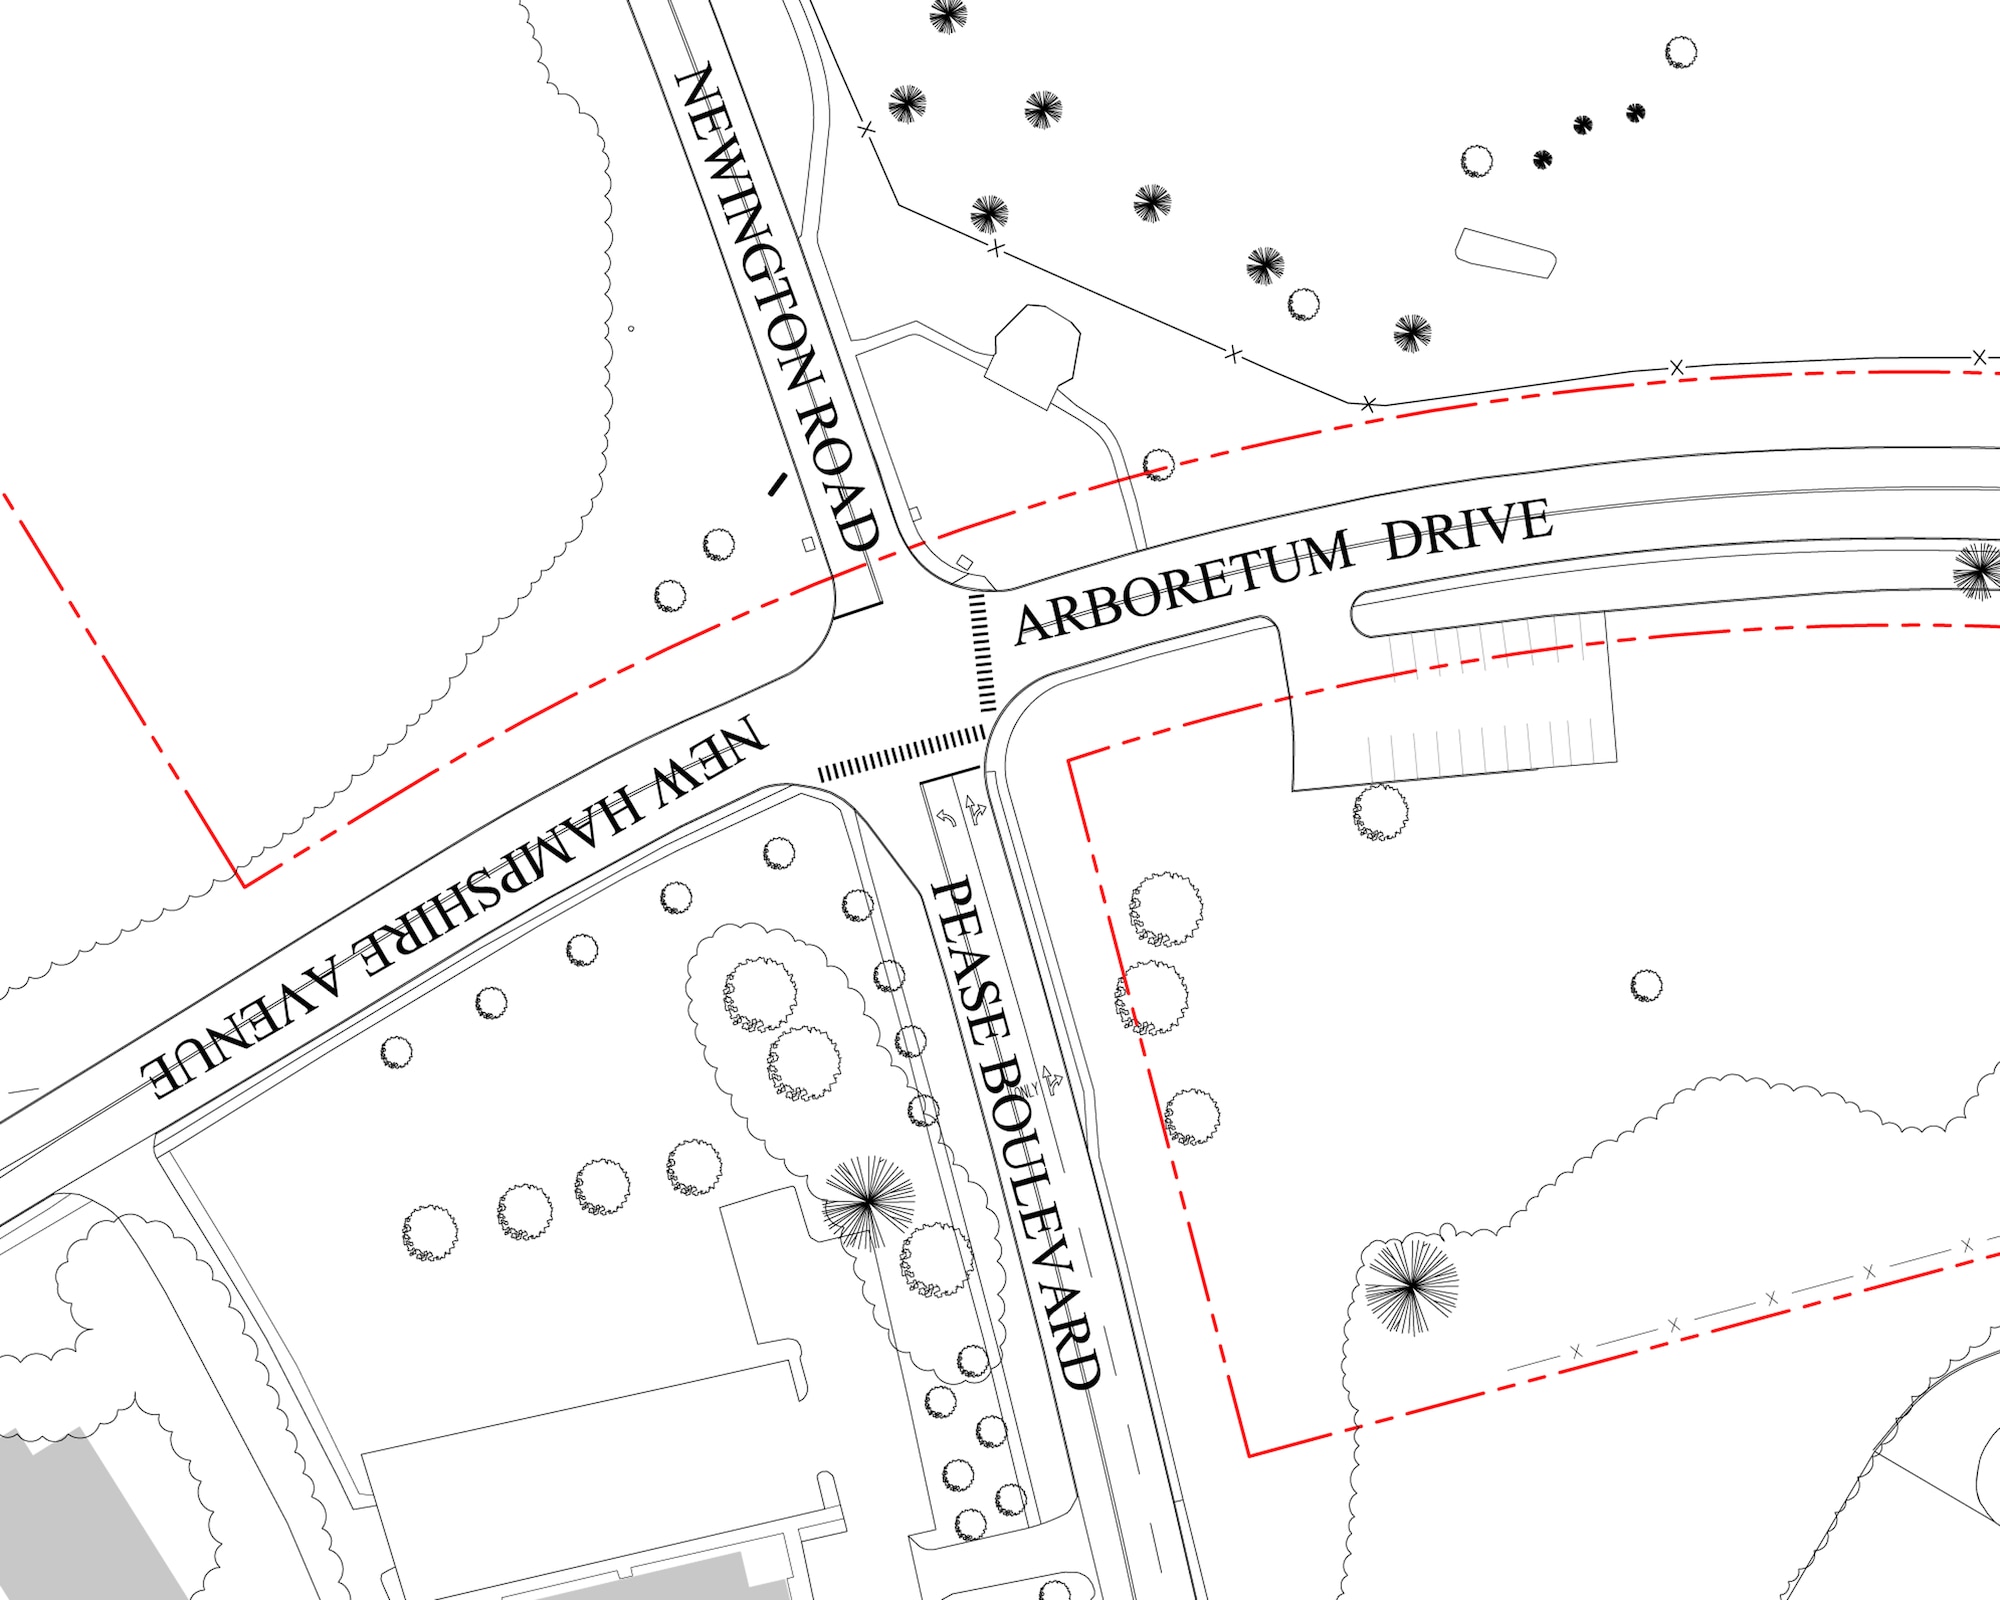 The curent four-way intersection at Arboretum Drive, New Hampshire Avenue, Newington Road, and Pease Boulevard is currently a two-way stop with stop signs only on the corners of Pease Boulevard and Newington Road. (U.S. National Guard graphic by James F. O'Loughlin)